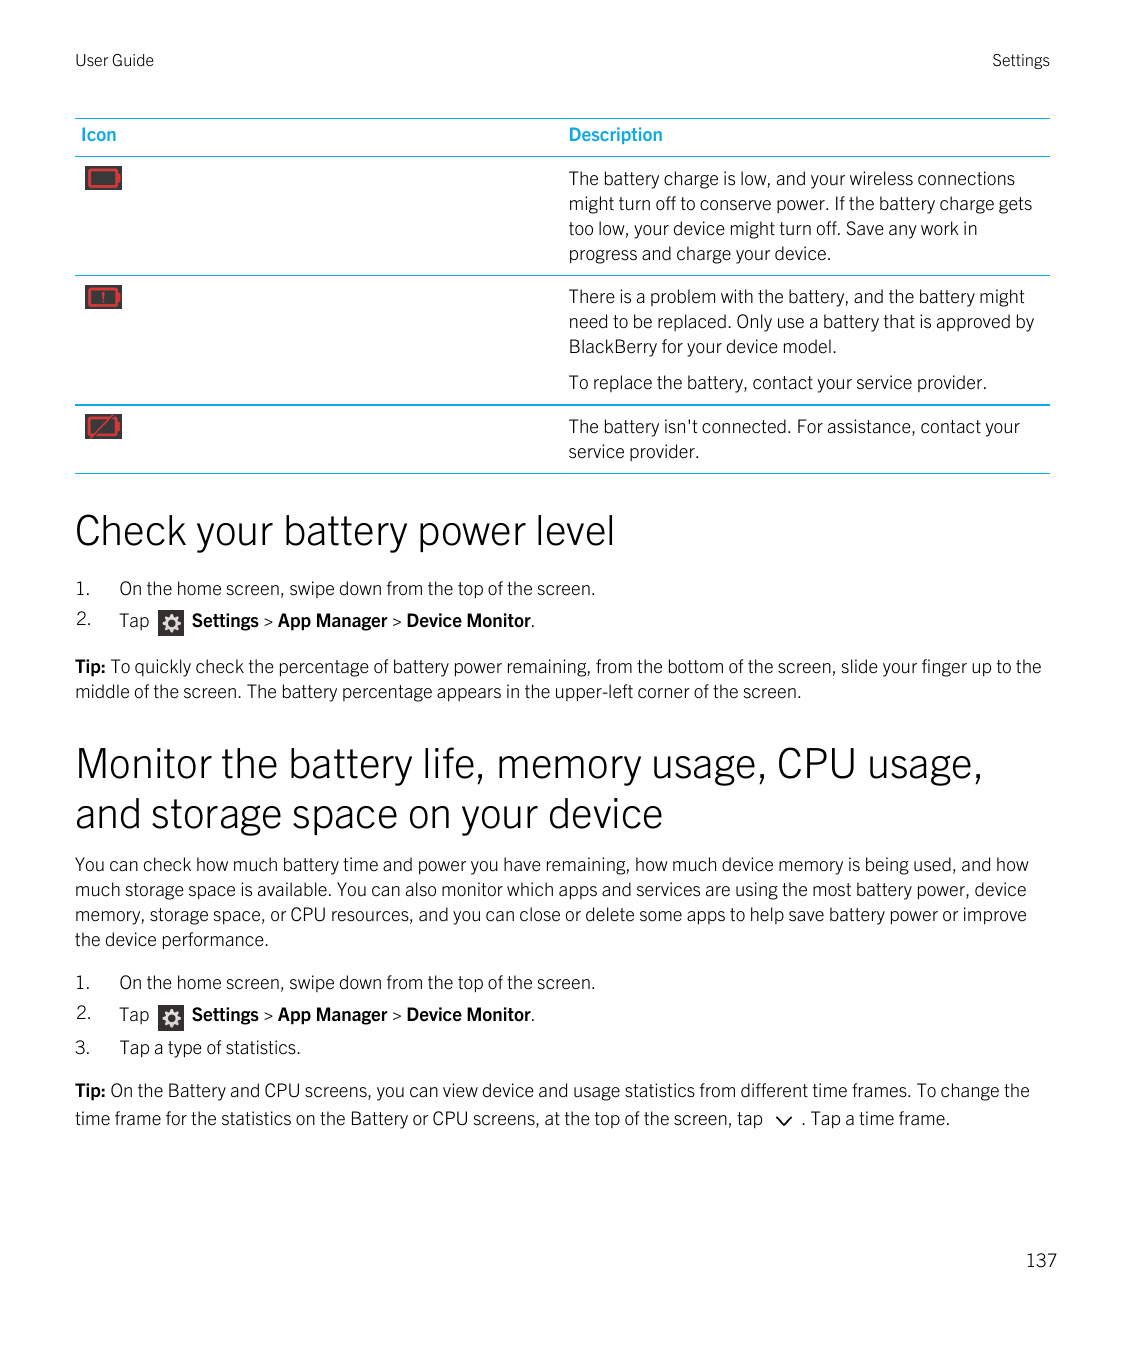 User GuideSettingsIconDescriptionThe battery charge is low, and your wireless connectionsmight turn off to conserve power. If th